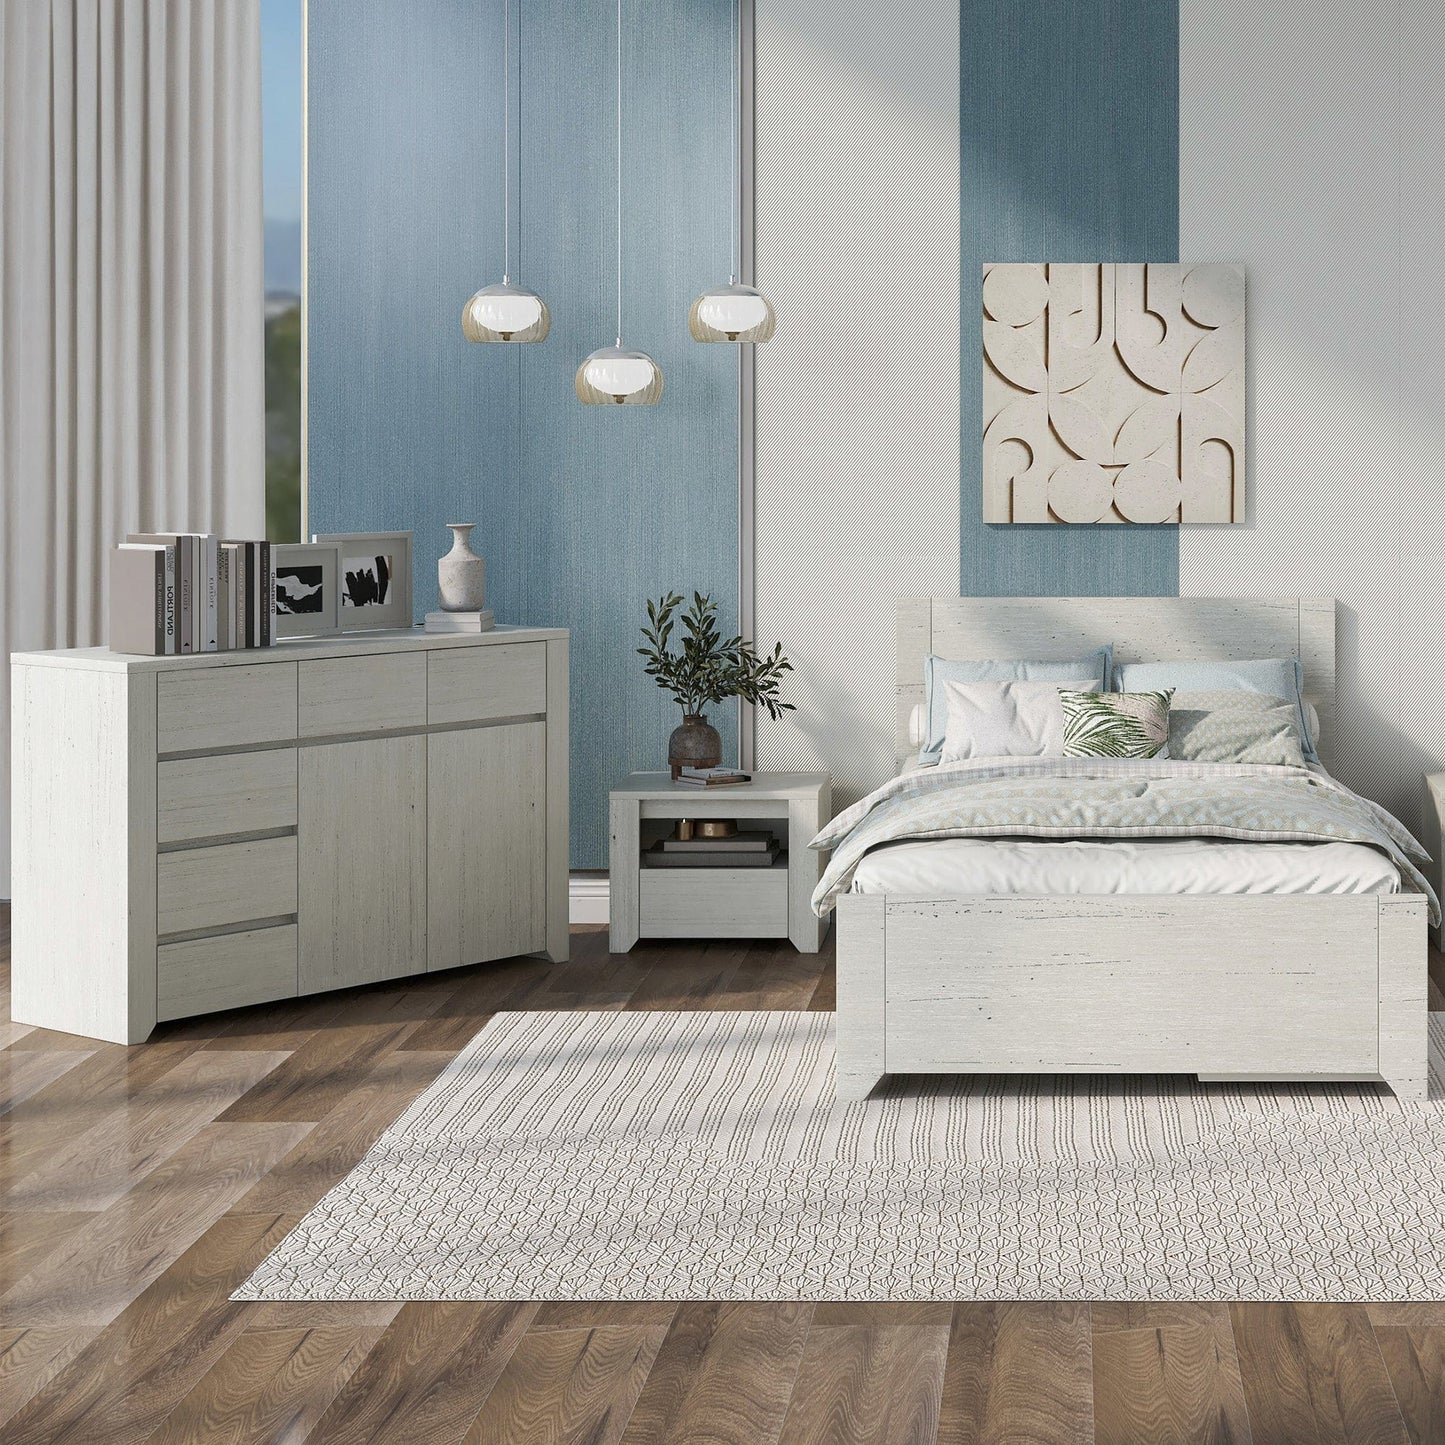 3 Pieces Cream Simple Style Manufacture Wood Bedroom Sets with Twin bed, Nightstand and Dresser